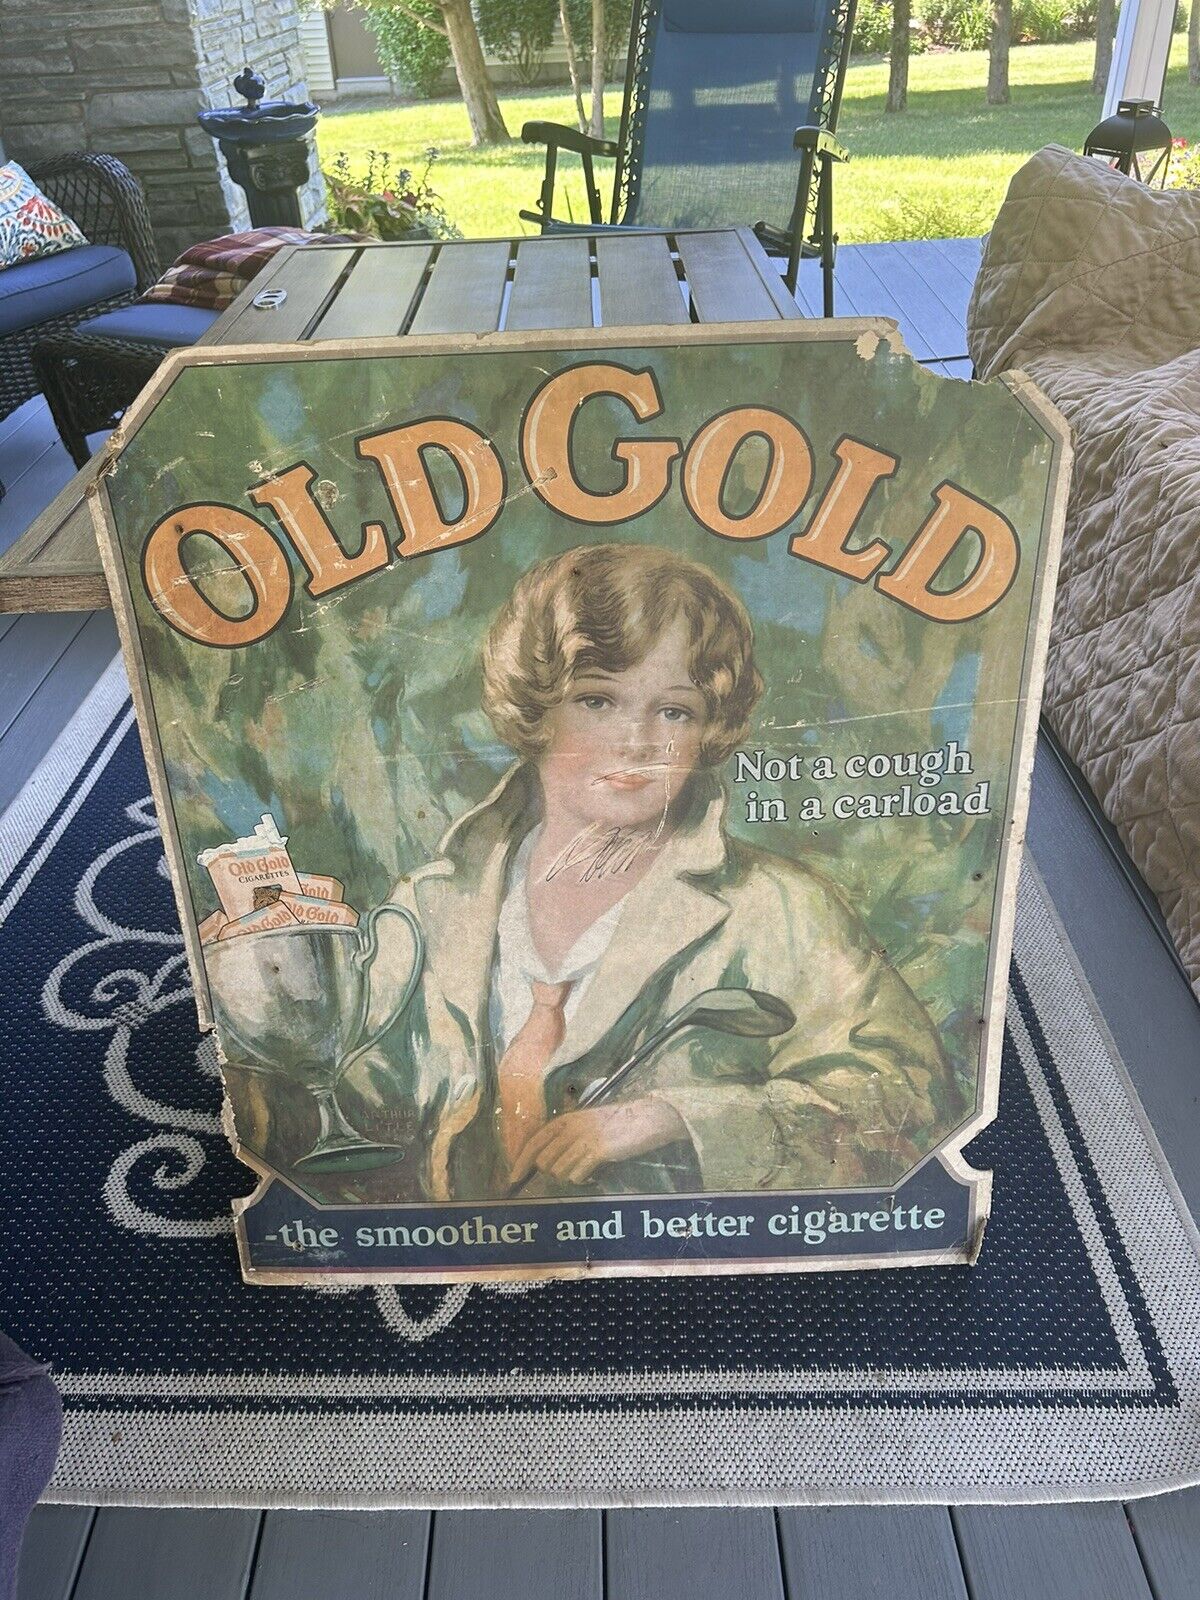 RARE EARLY 1930S OLD GOLD CIGARETTES CARDBOARD ADVERTISING SIGN LADY GOLFER